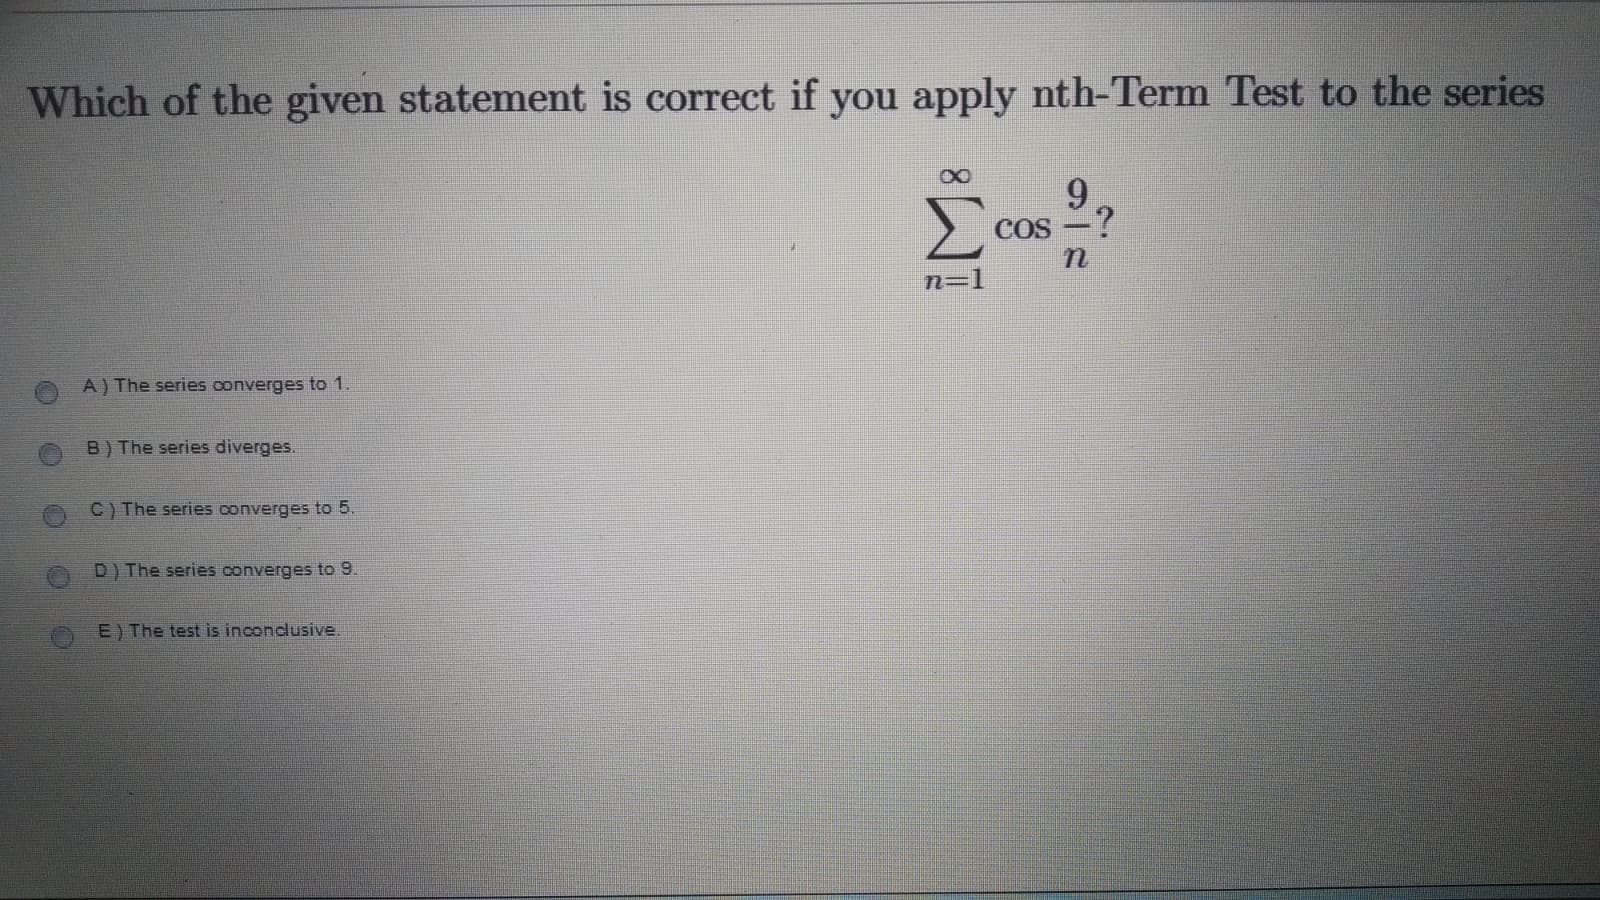 Which of the given statement is correct if you apply nth-Term Test to the series
E cos ?
9.
COS
